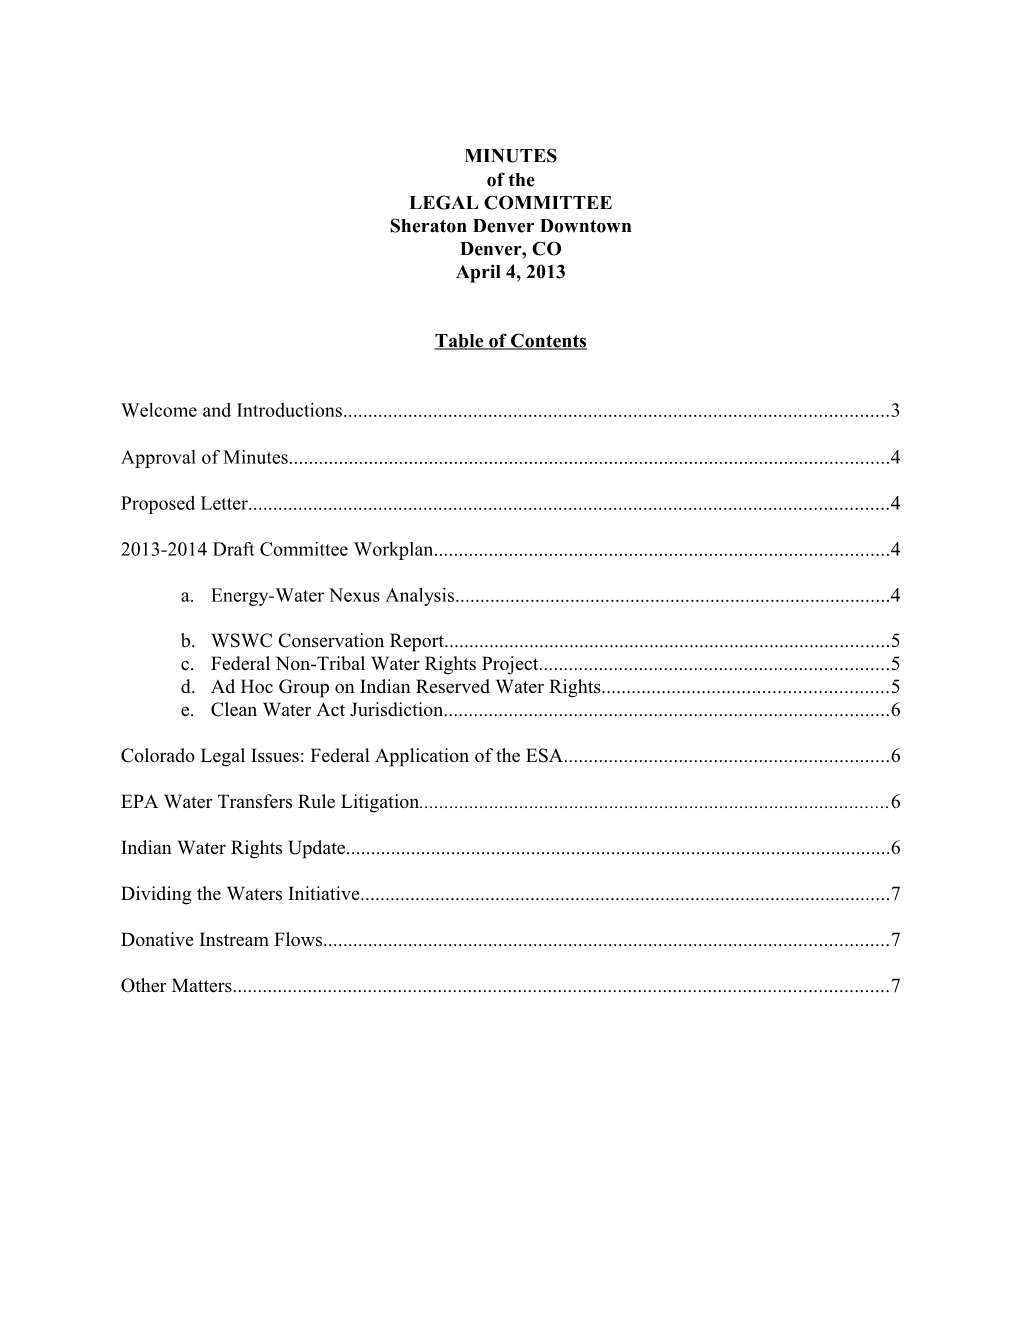 Minutes of the Water Resources Committee